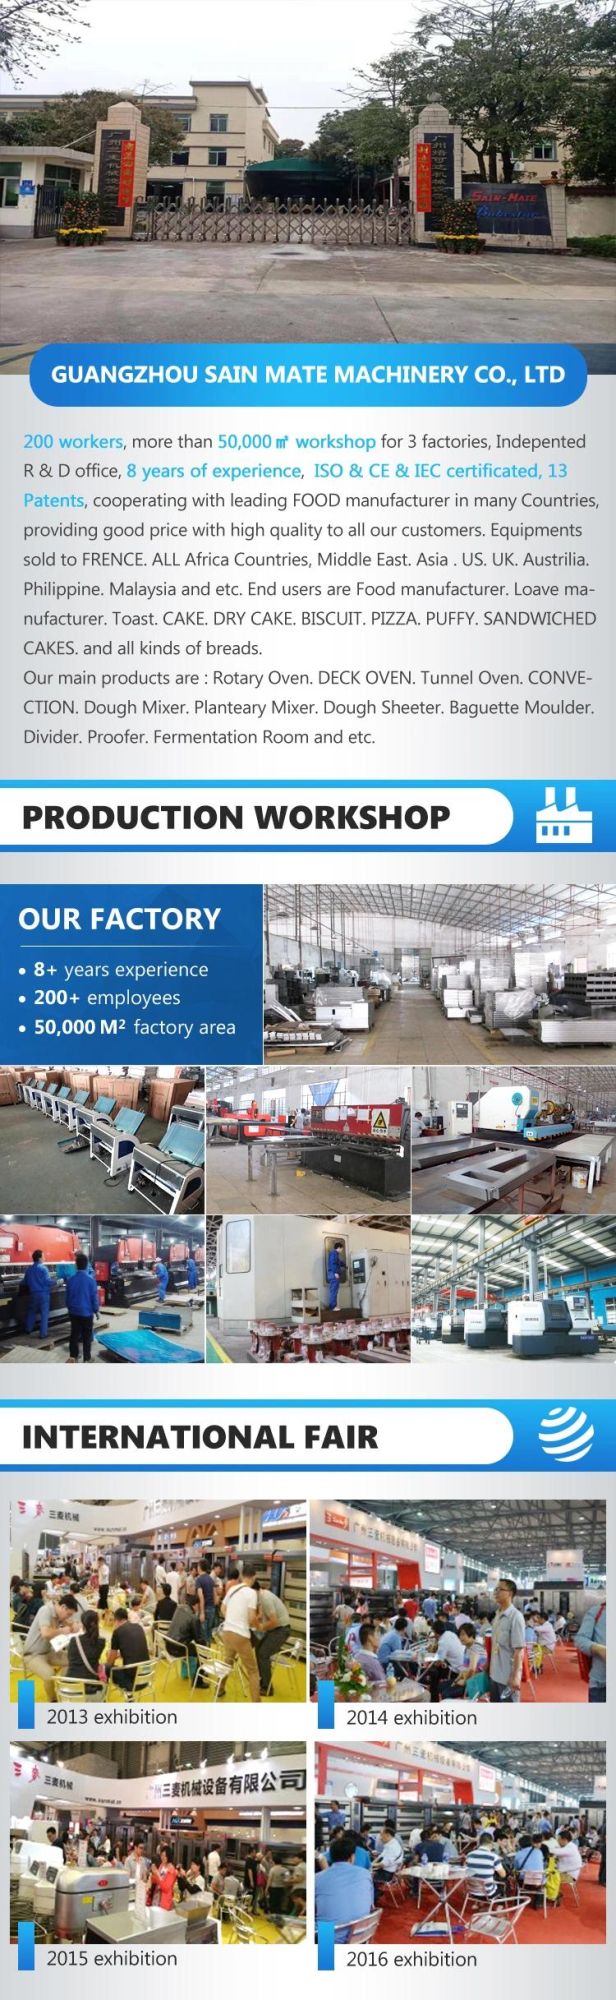 Commercial Bakery Oven, Gas Deck Oven, Electric Deck Baking Machine, Industrial Oven for Sale